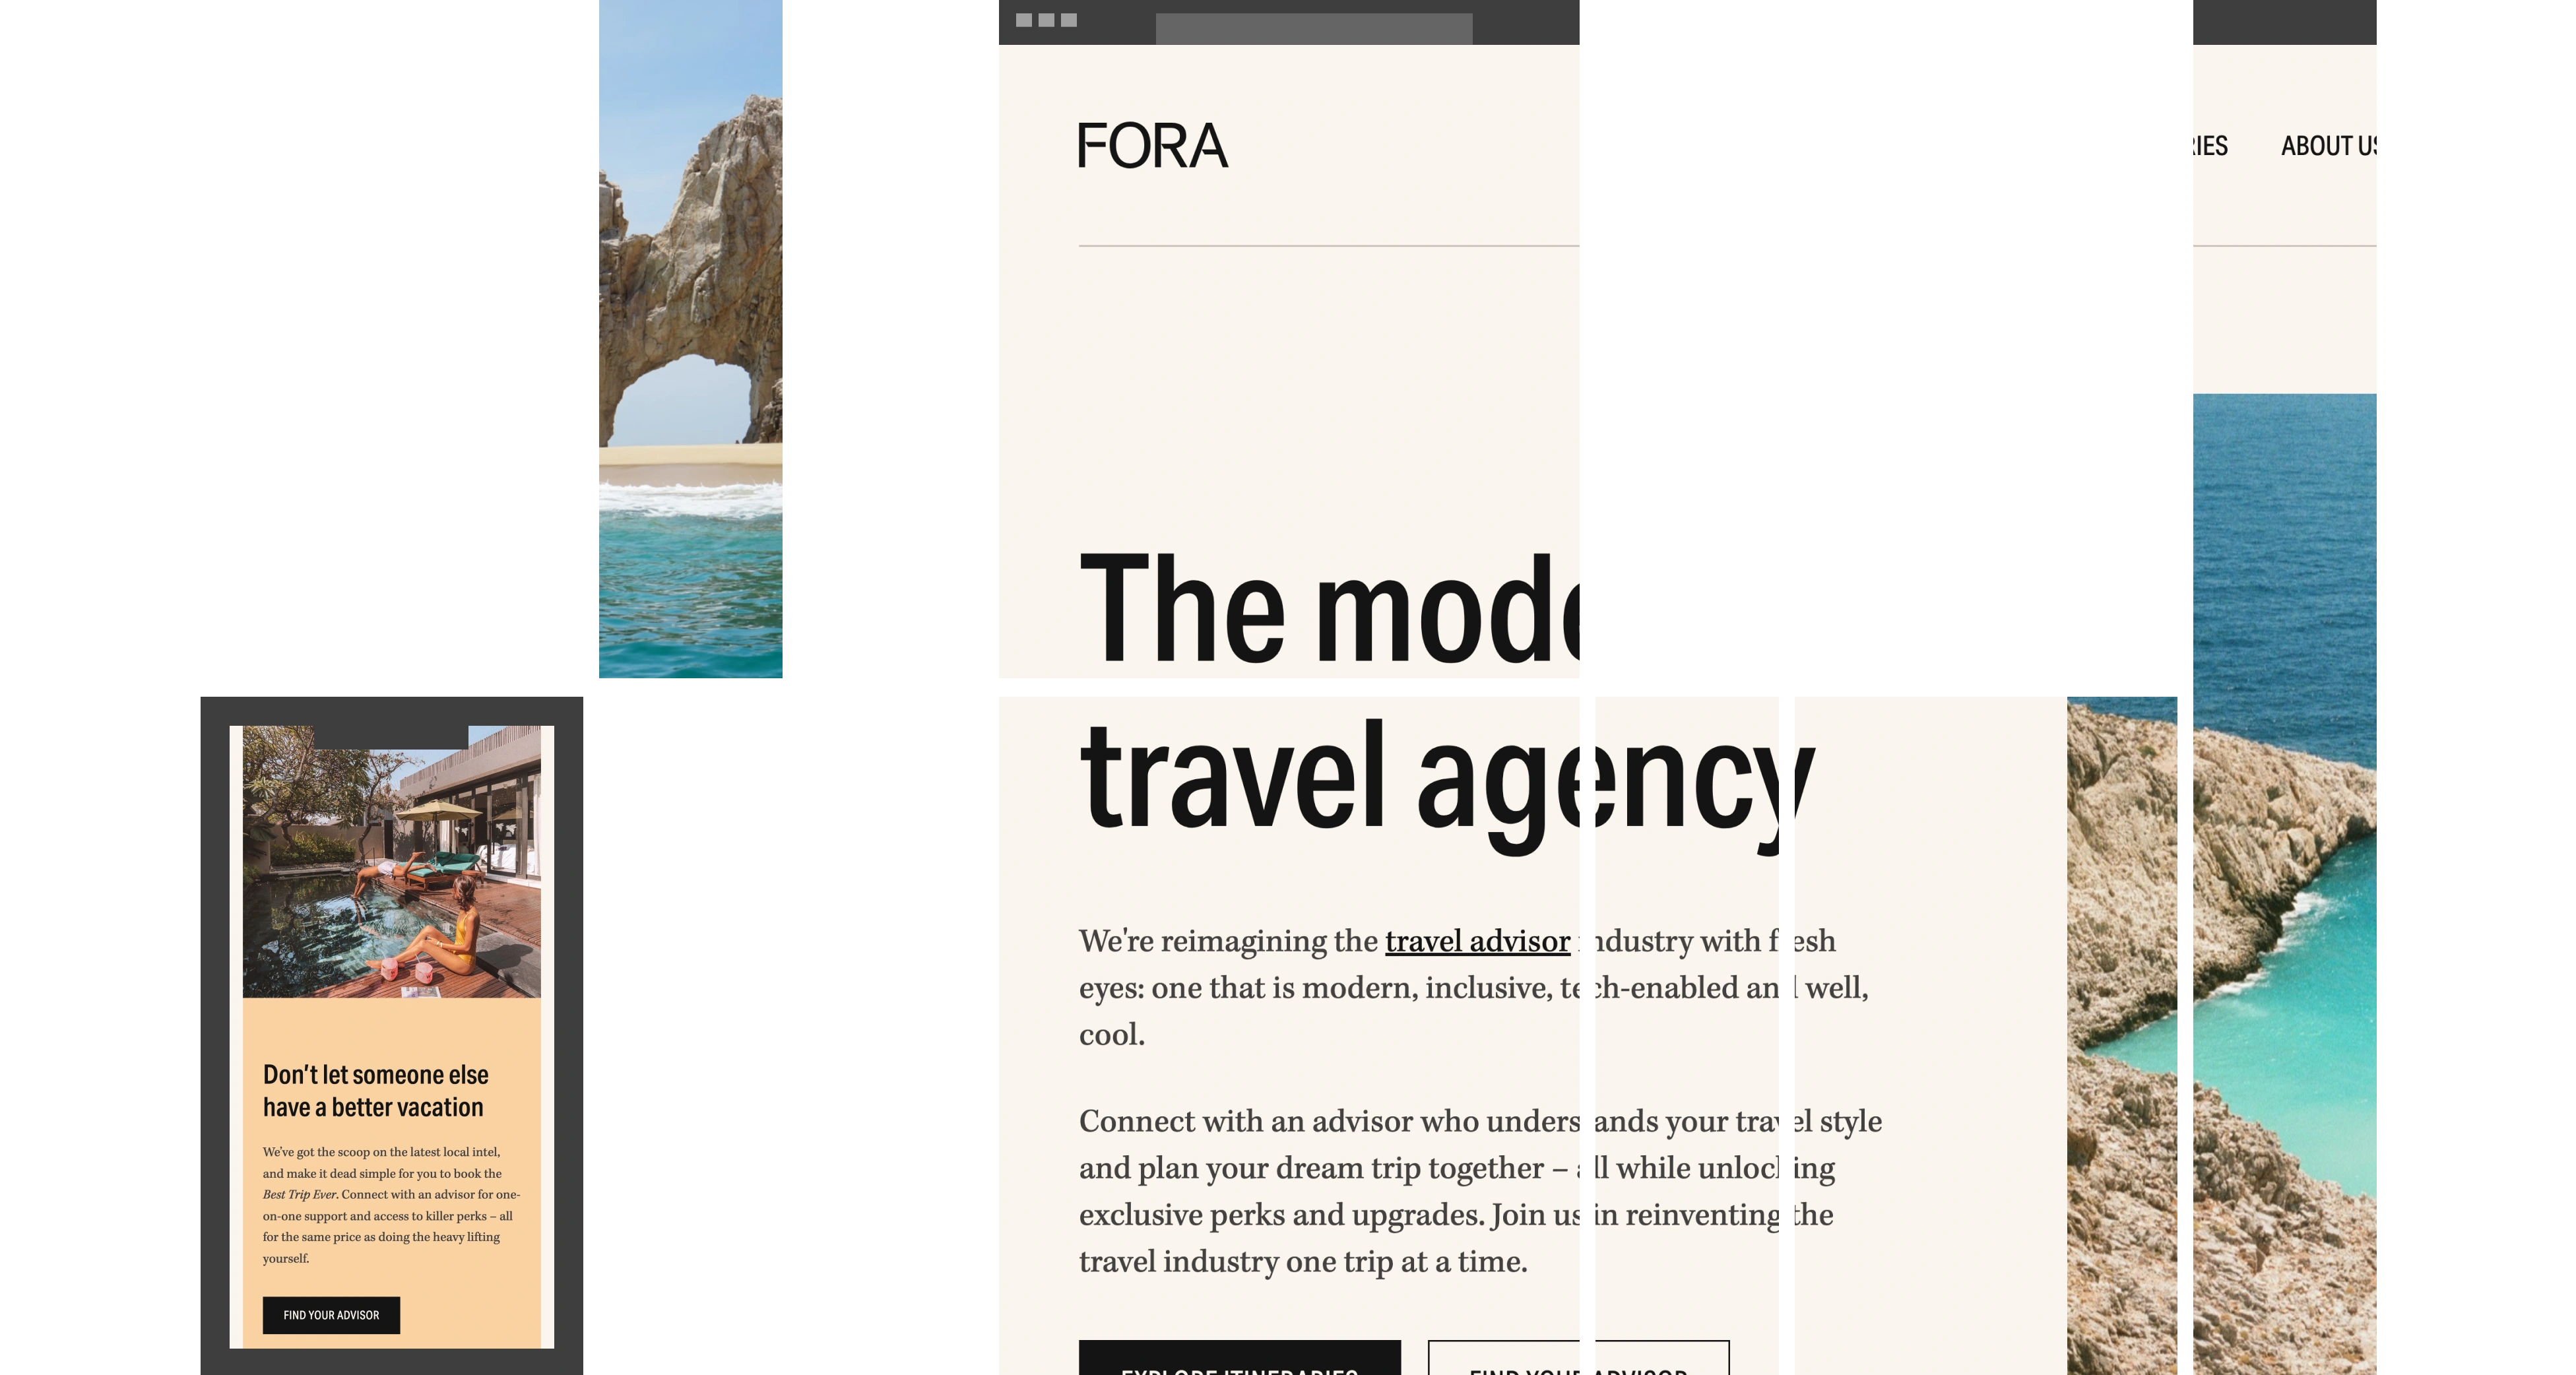 Image showing a product designed or developed by Shift Lab for Fora Travel